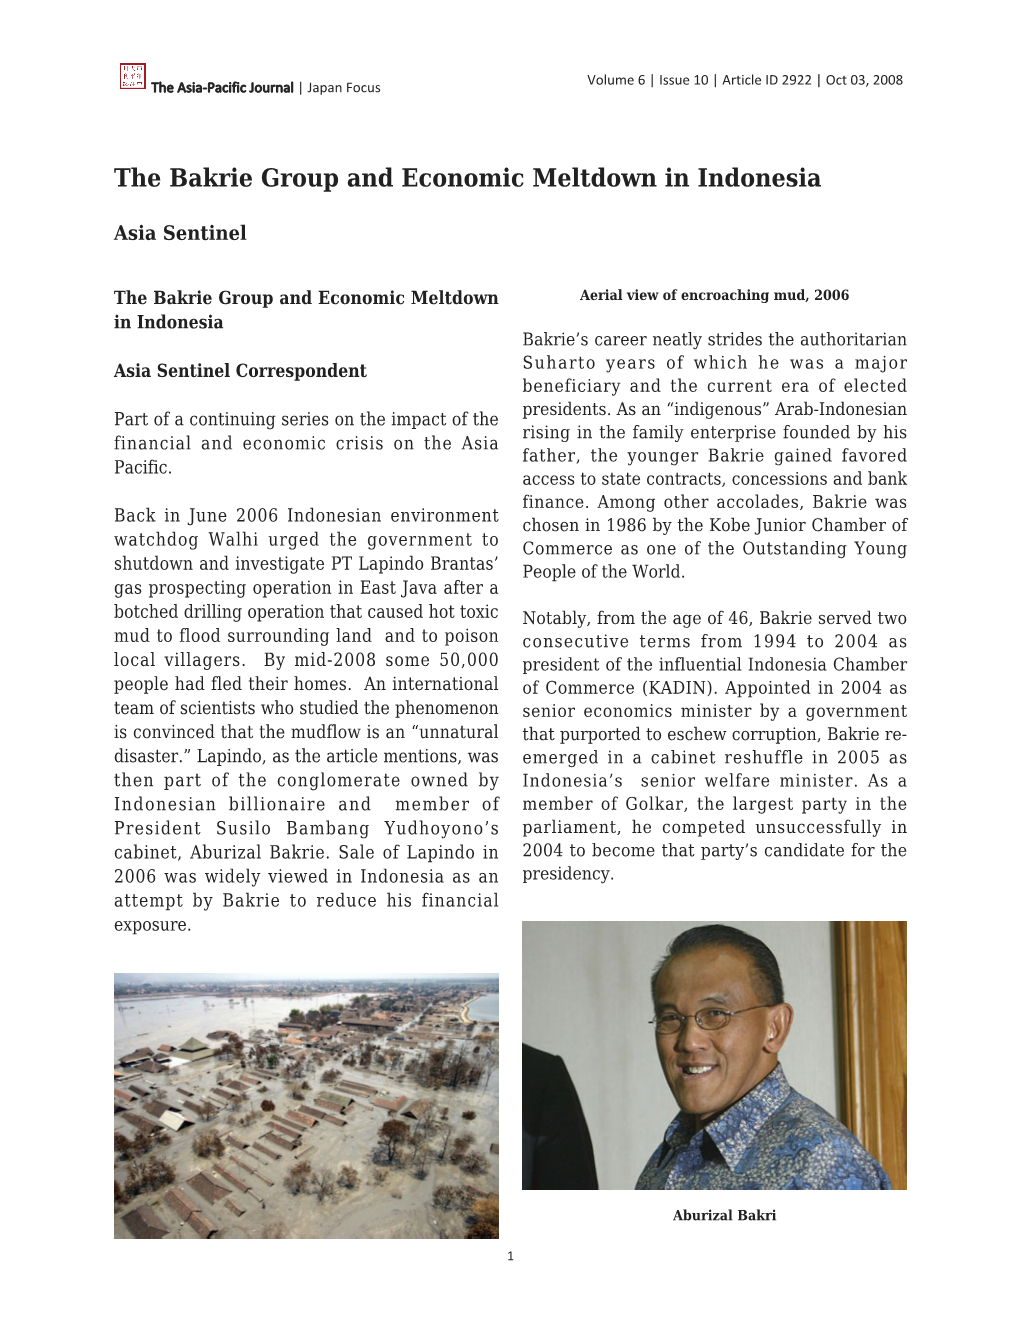 The Bakrie Group and Economic Meltdown in Indonesia